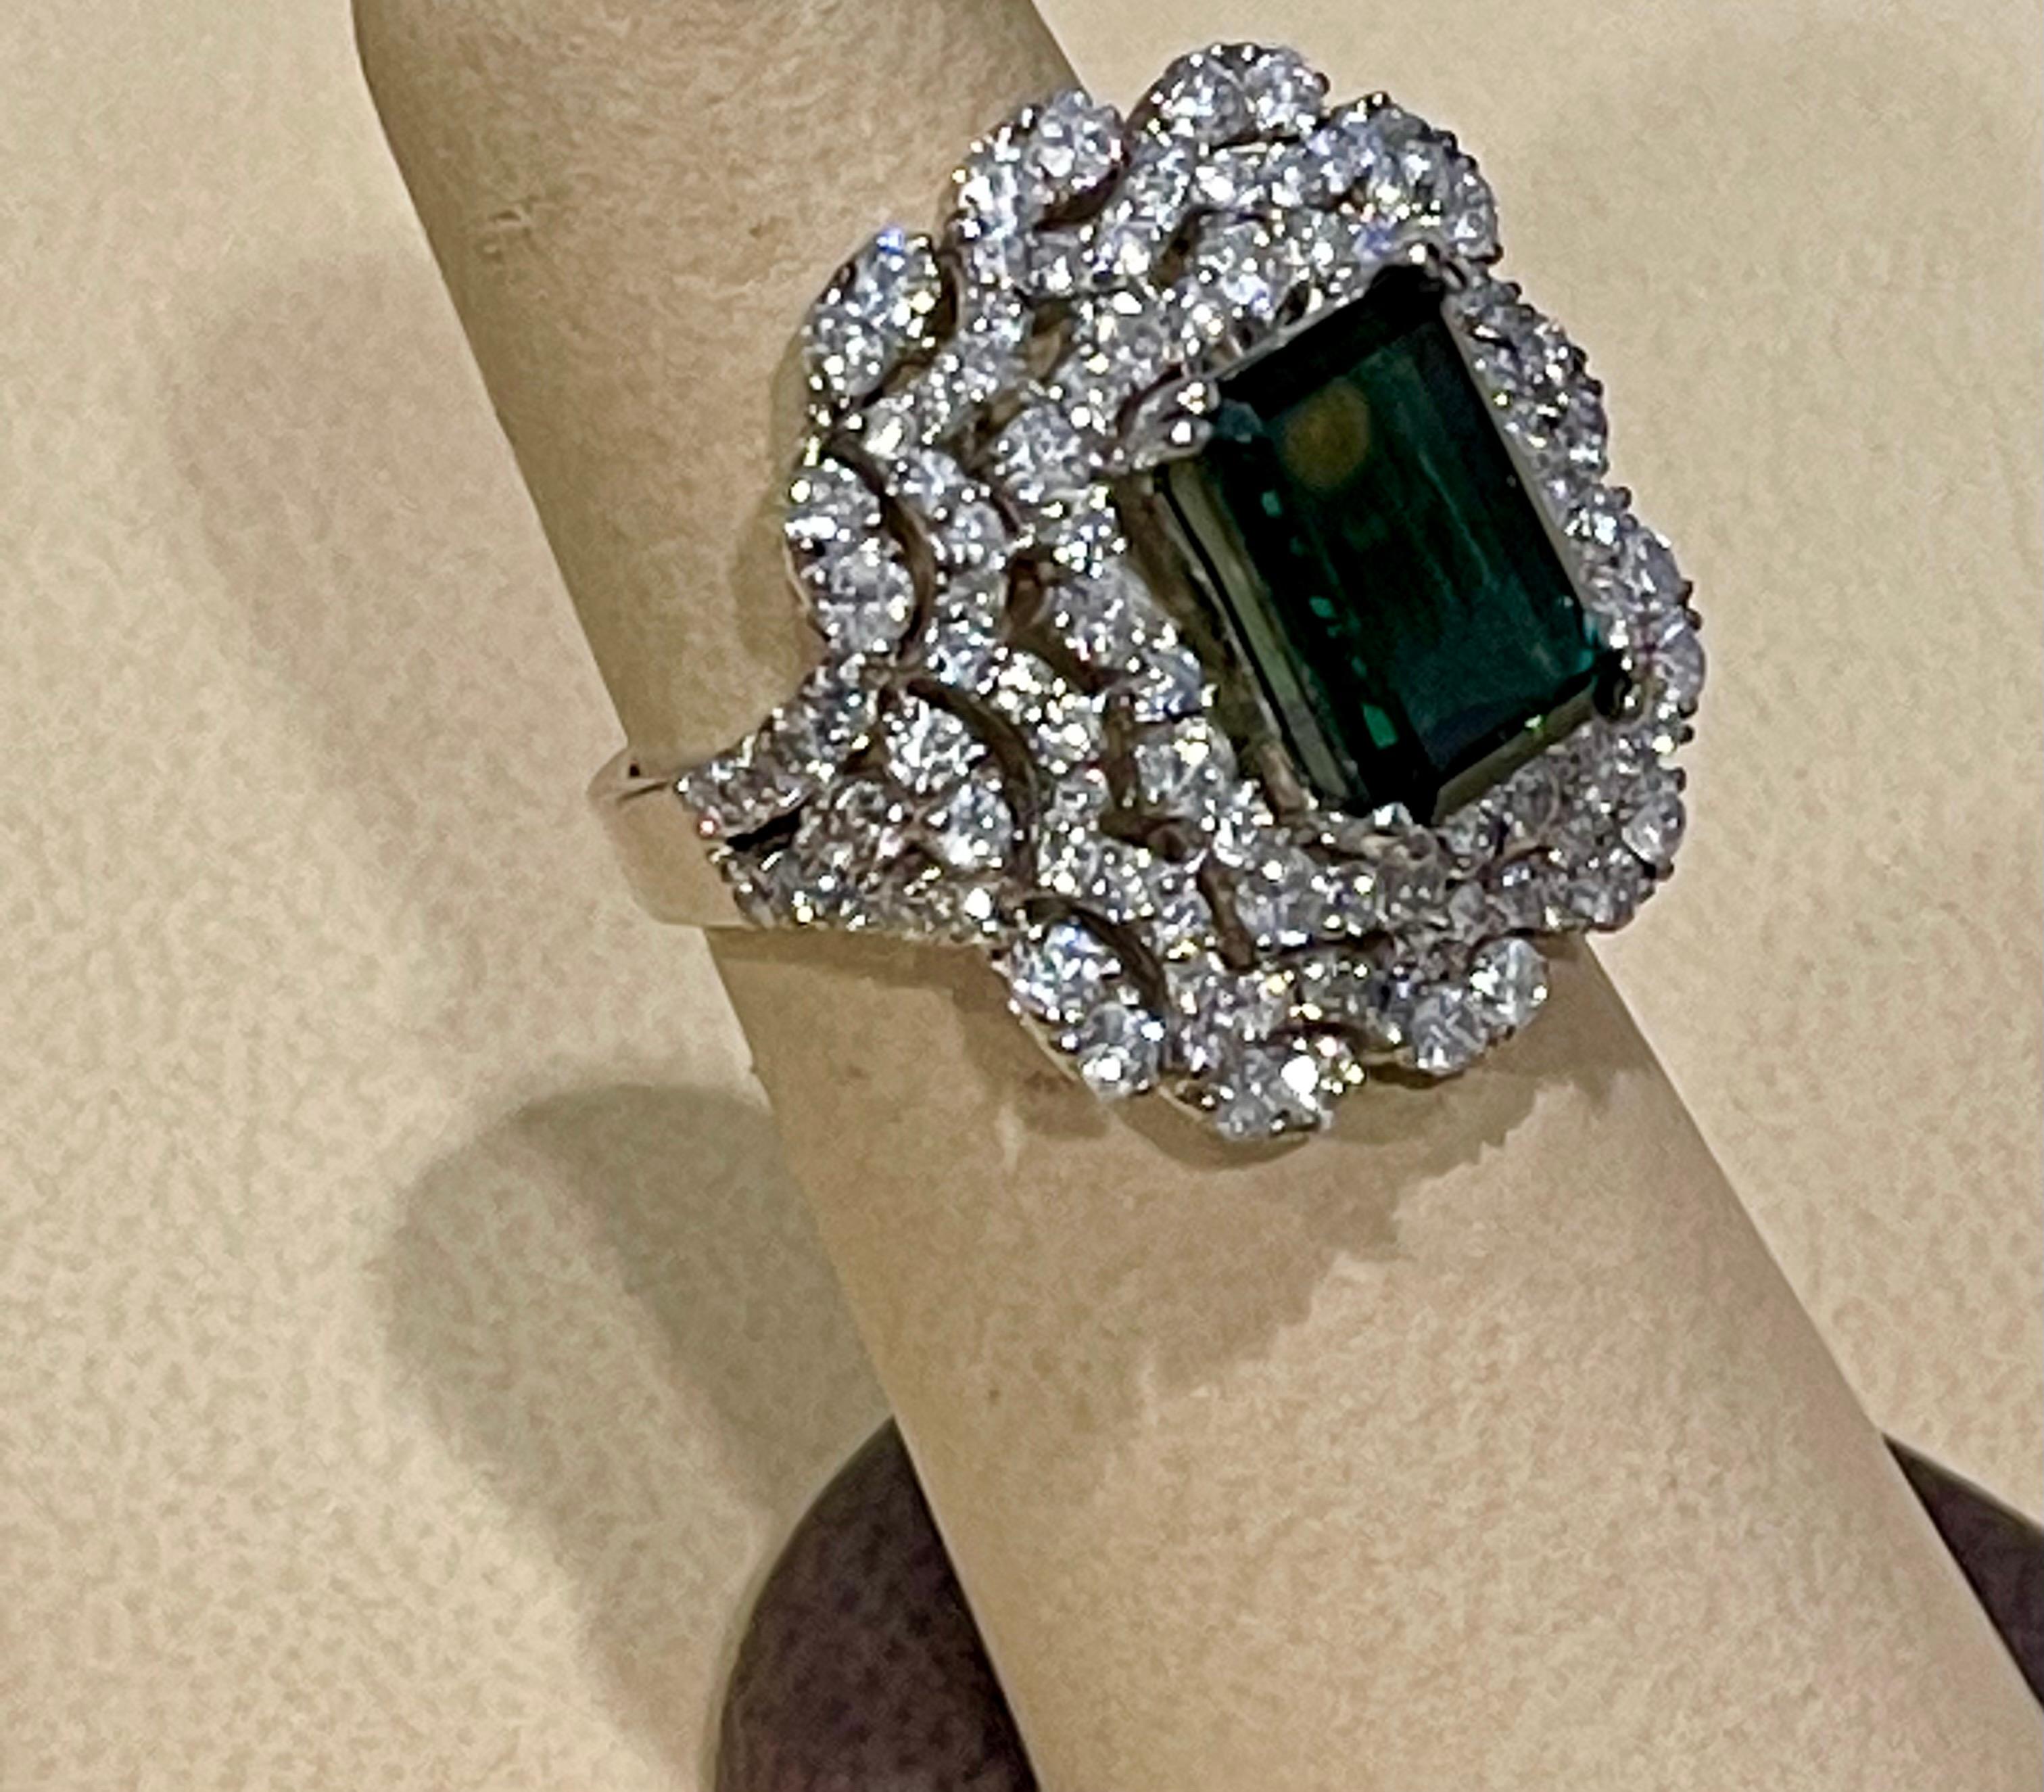 6.5 Carat Green Tourmaline & 4.2 Carat Diamond Cocktail Ring 18 Karat White Gold In Excellent Condition For Sale In New York, NY